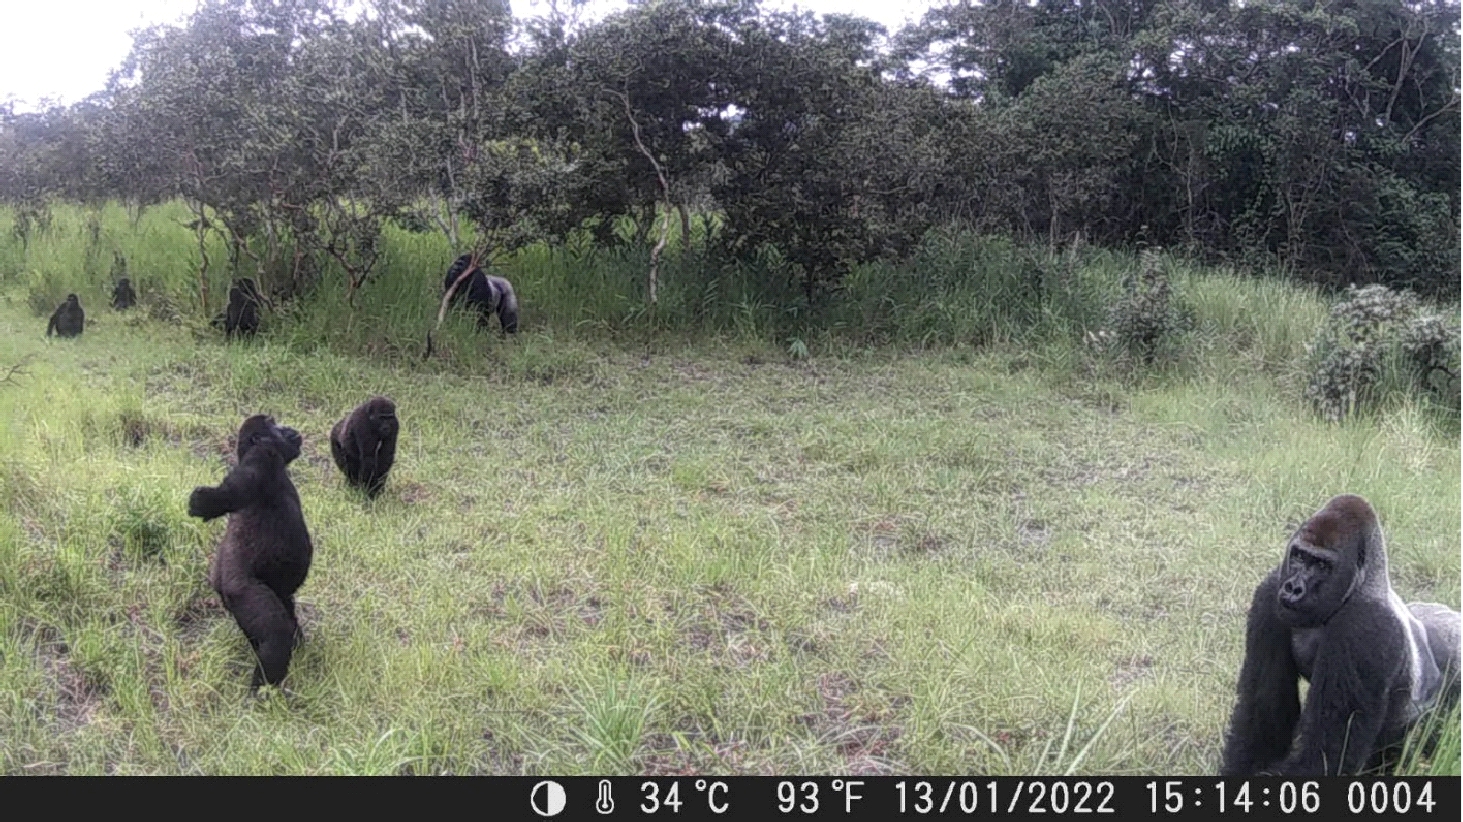 2020A-160 Makouas Troop Caught on Camera Trap 13 Jan 2022